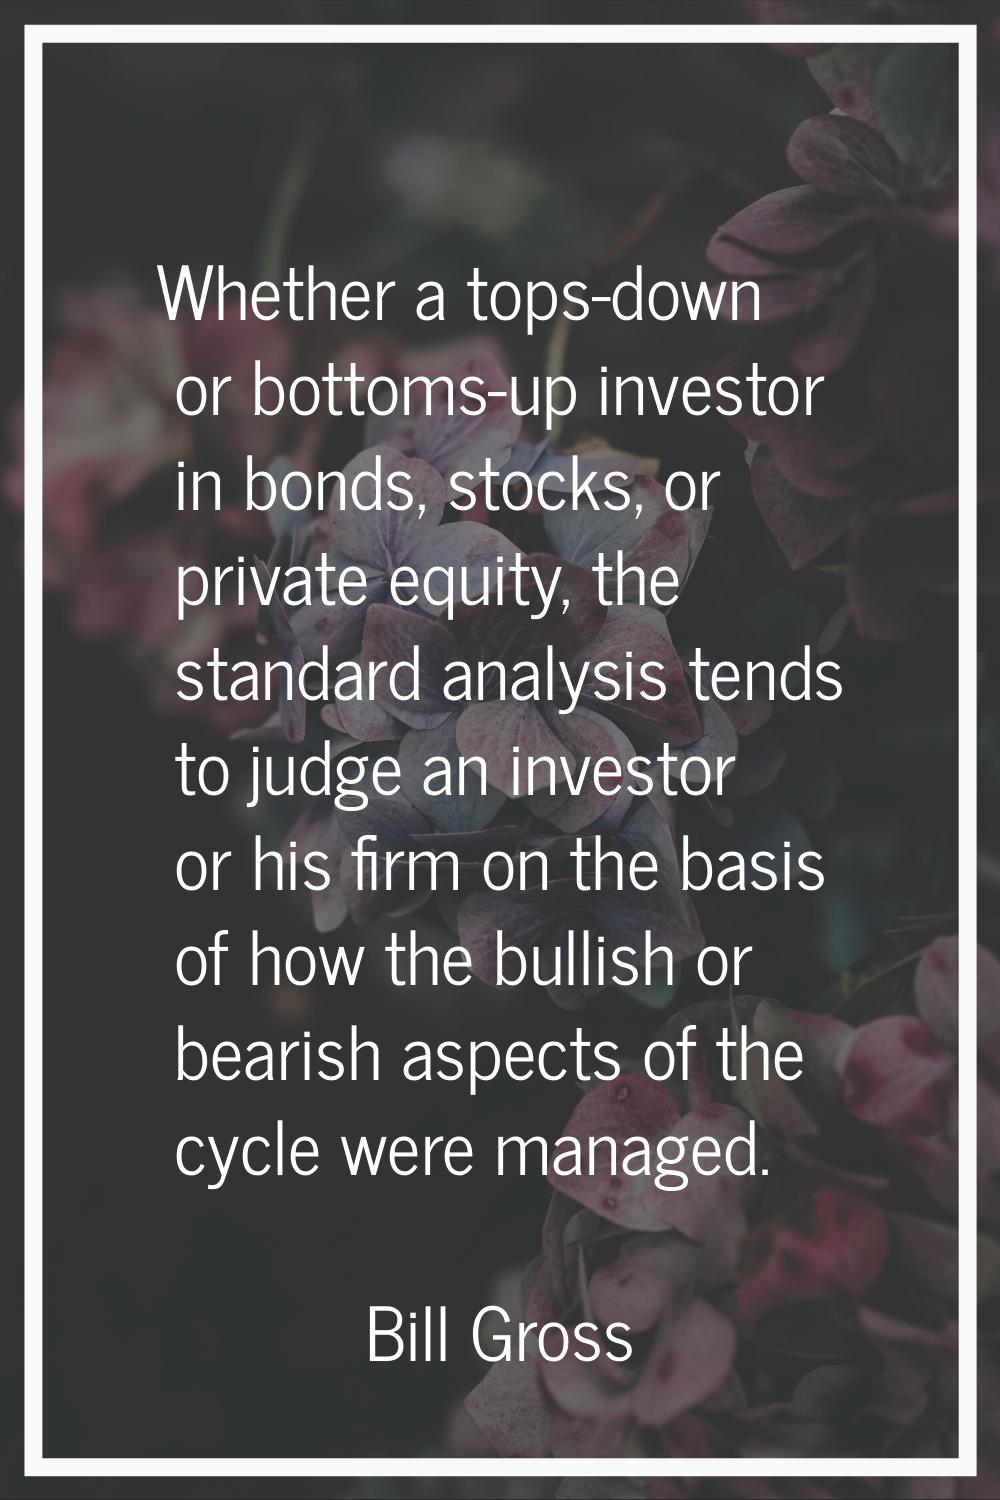 Whether a tops-down or bottoms-up investor in bonds, stocks, or private equity, the standard analys